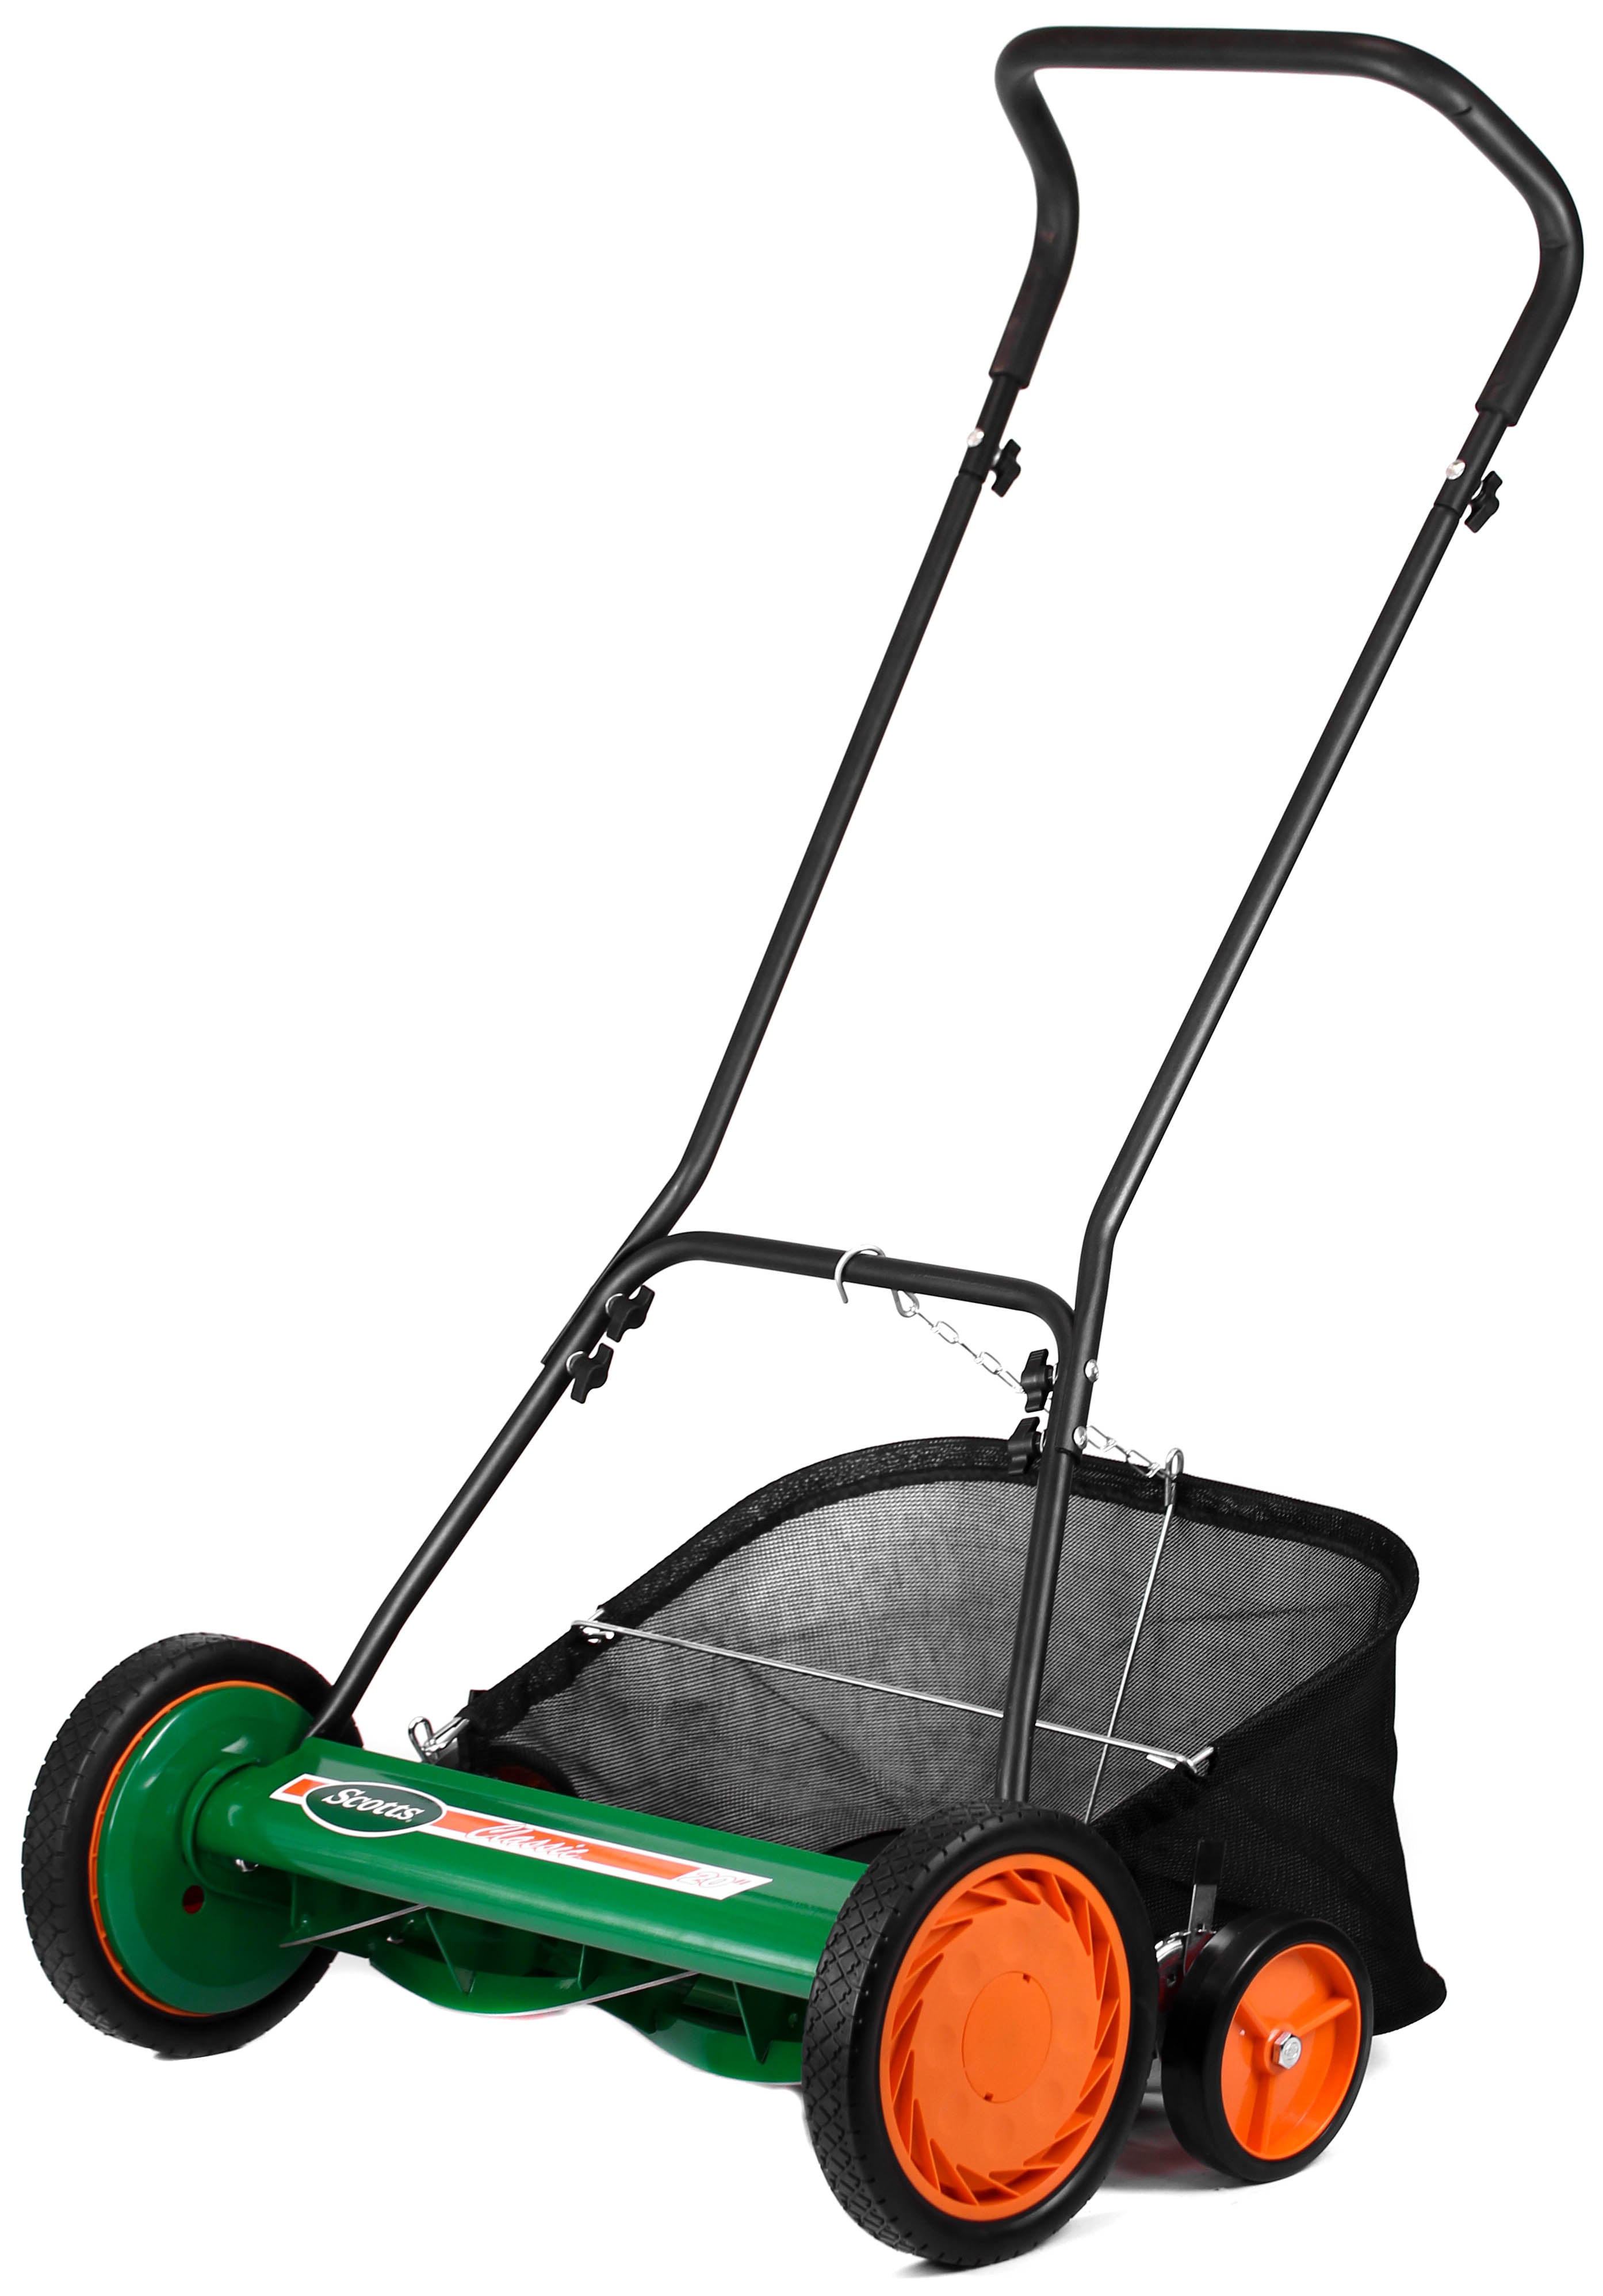 Bagger Included Reel Lawn Mowers at